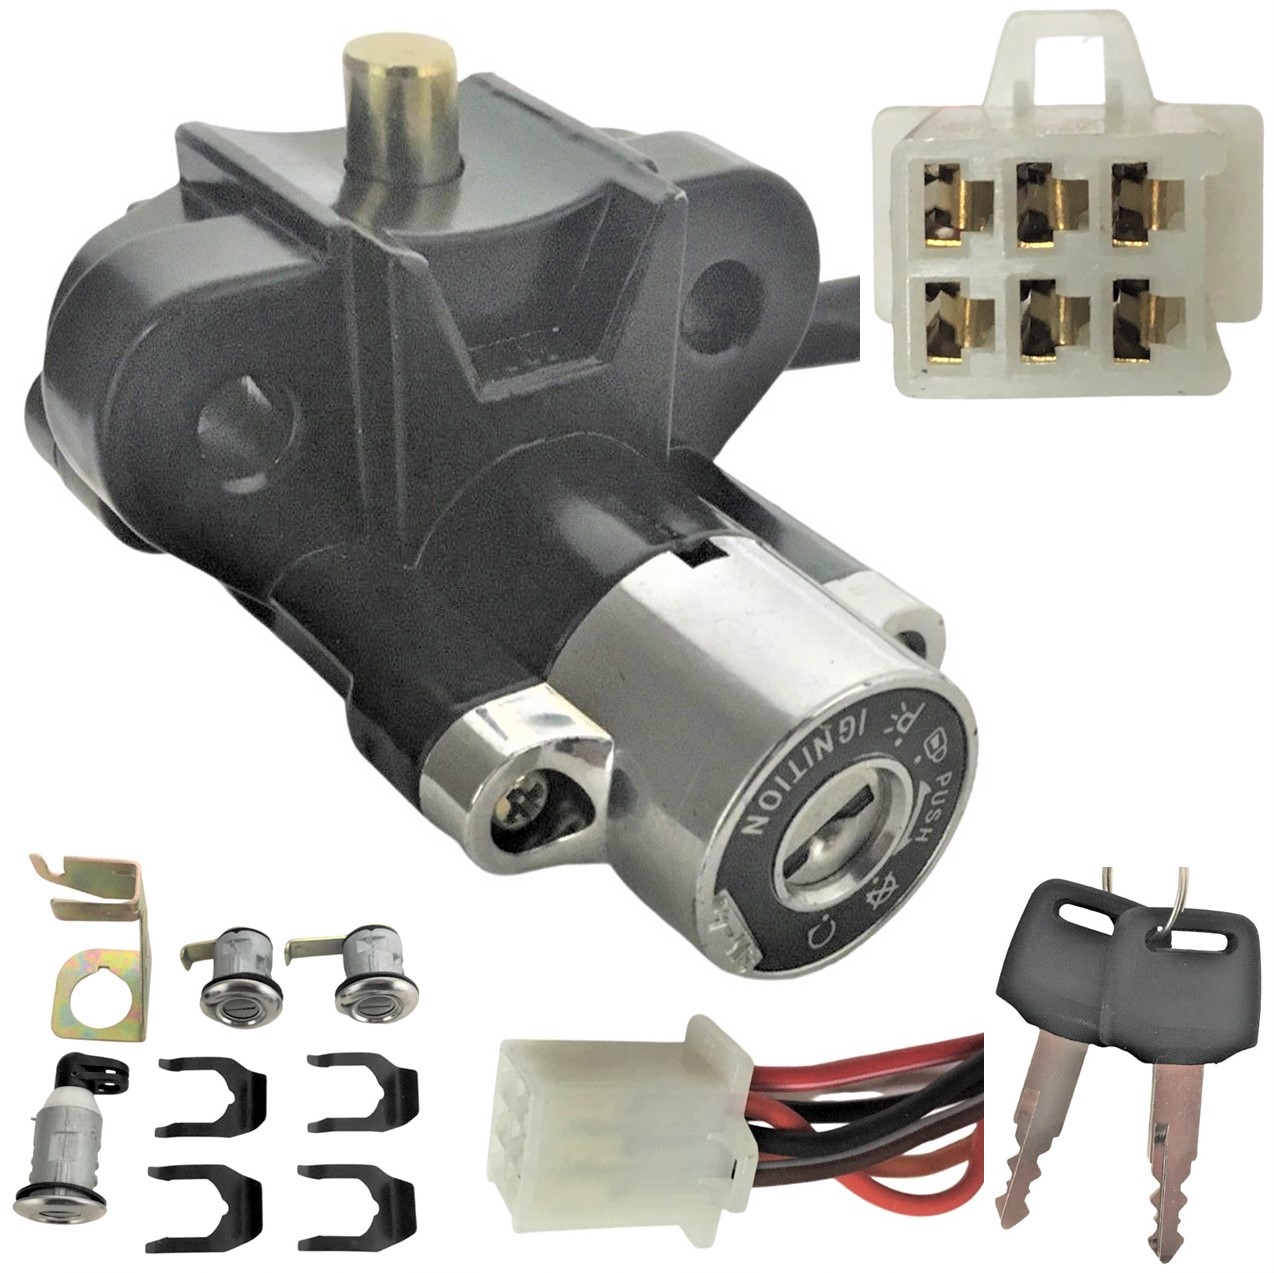 Ignition Switch Fits Many 150-250 Scooters With 3 Locks 6 Pin in 6 Pin Jack Bolts c/c=50mm